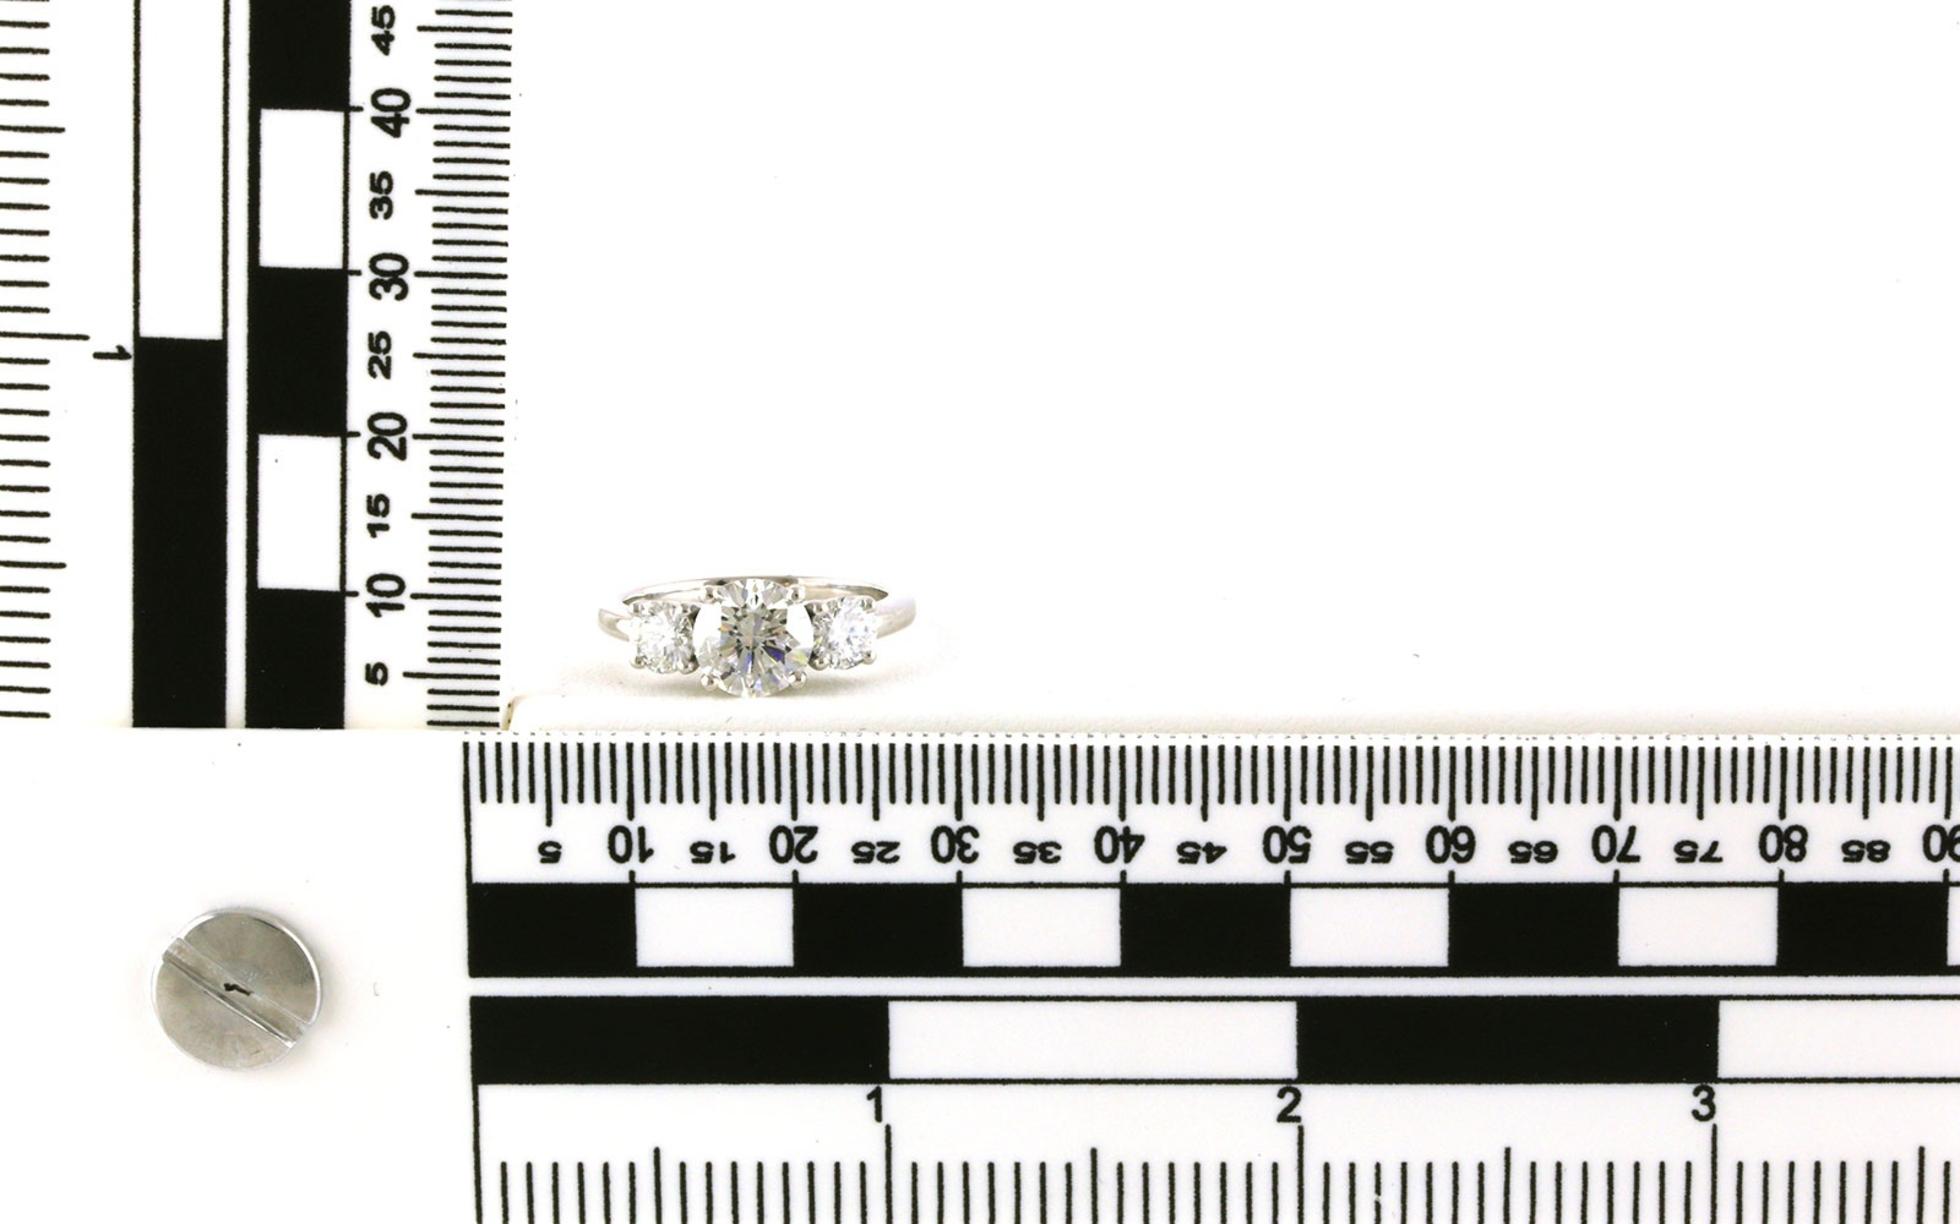 3-Stone Diamond Engagement Ring in Platinum (2.22cts TWT) Scale